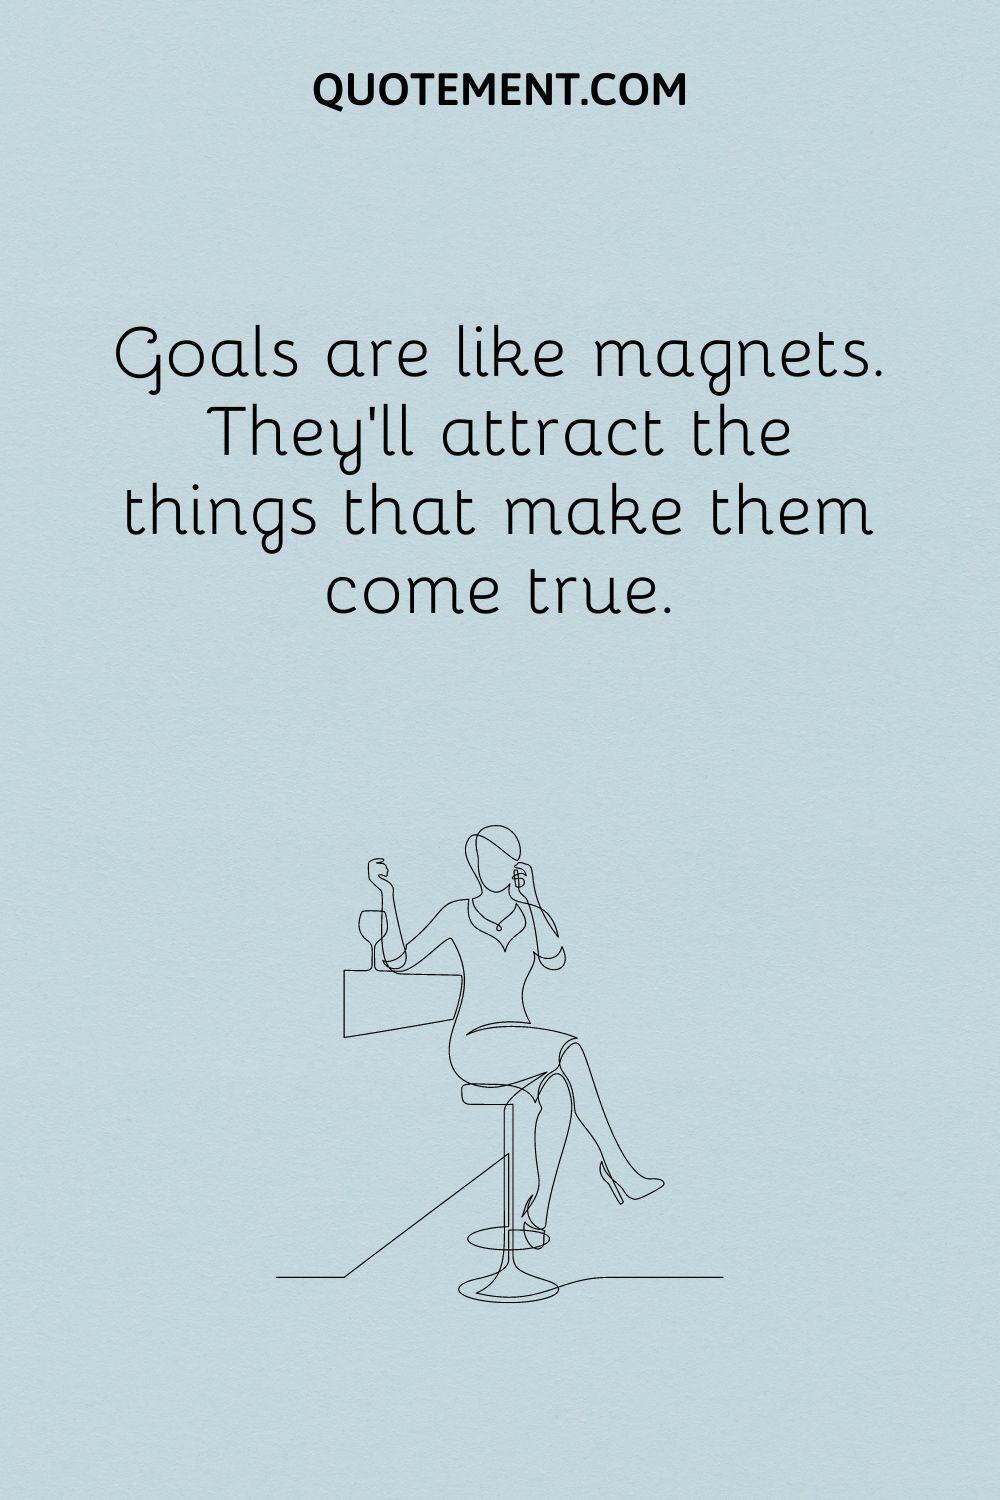 Goals are like magnets. They’ll attract the things that make them come true.